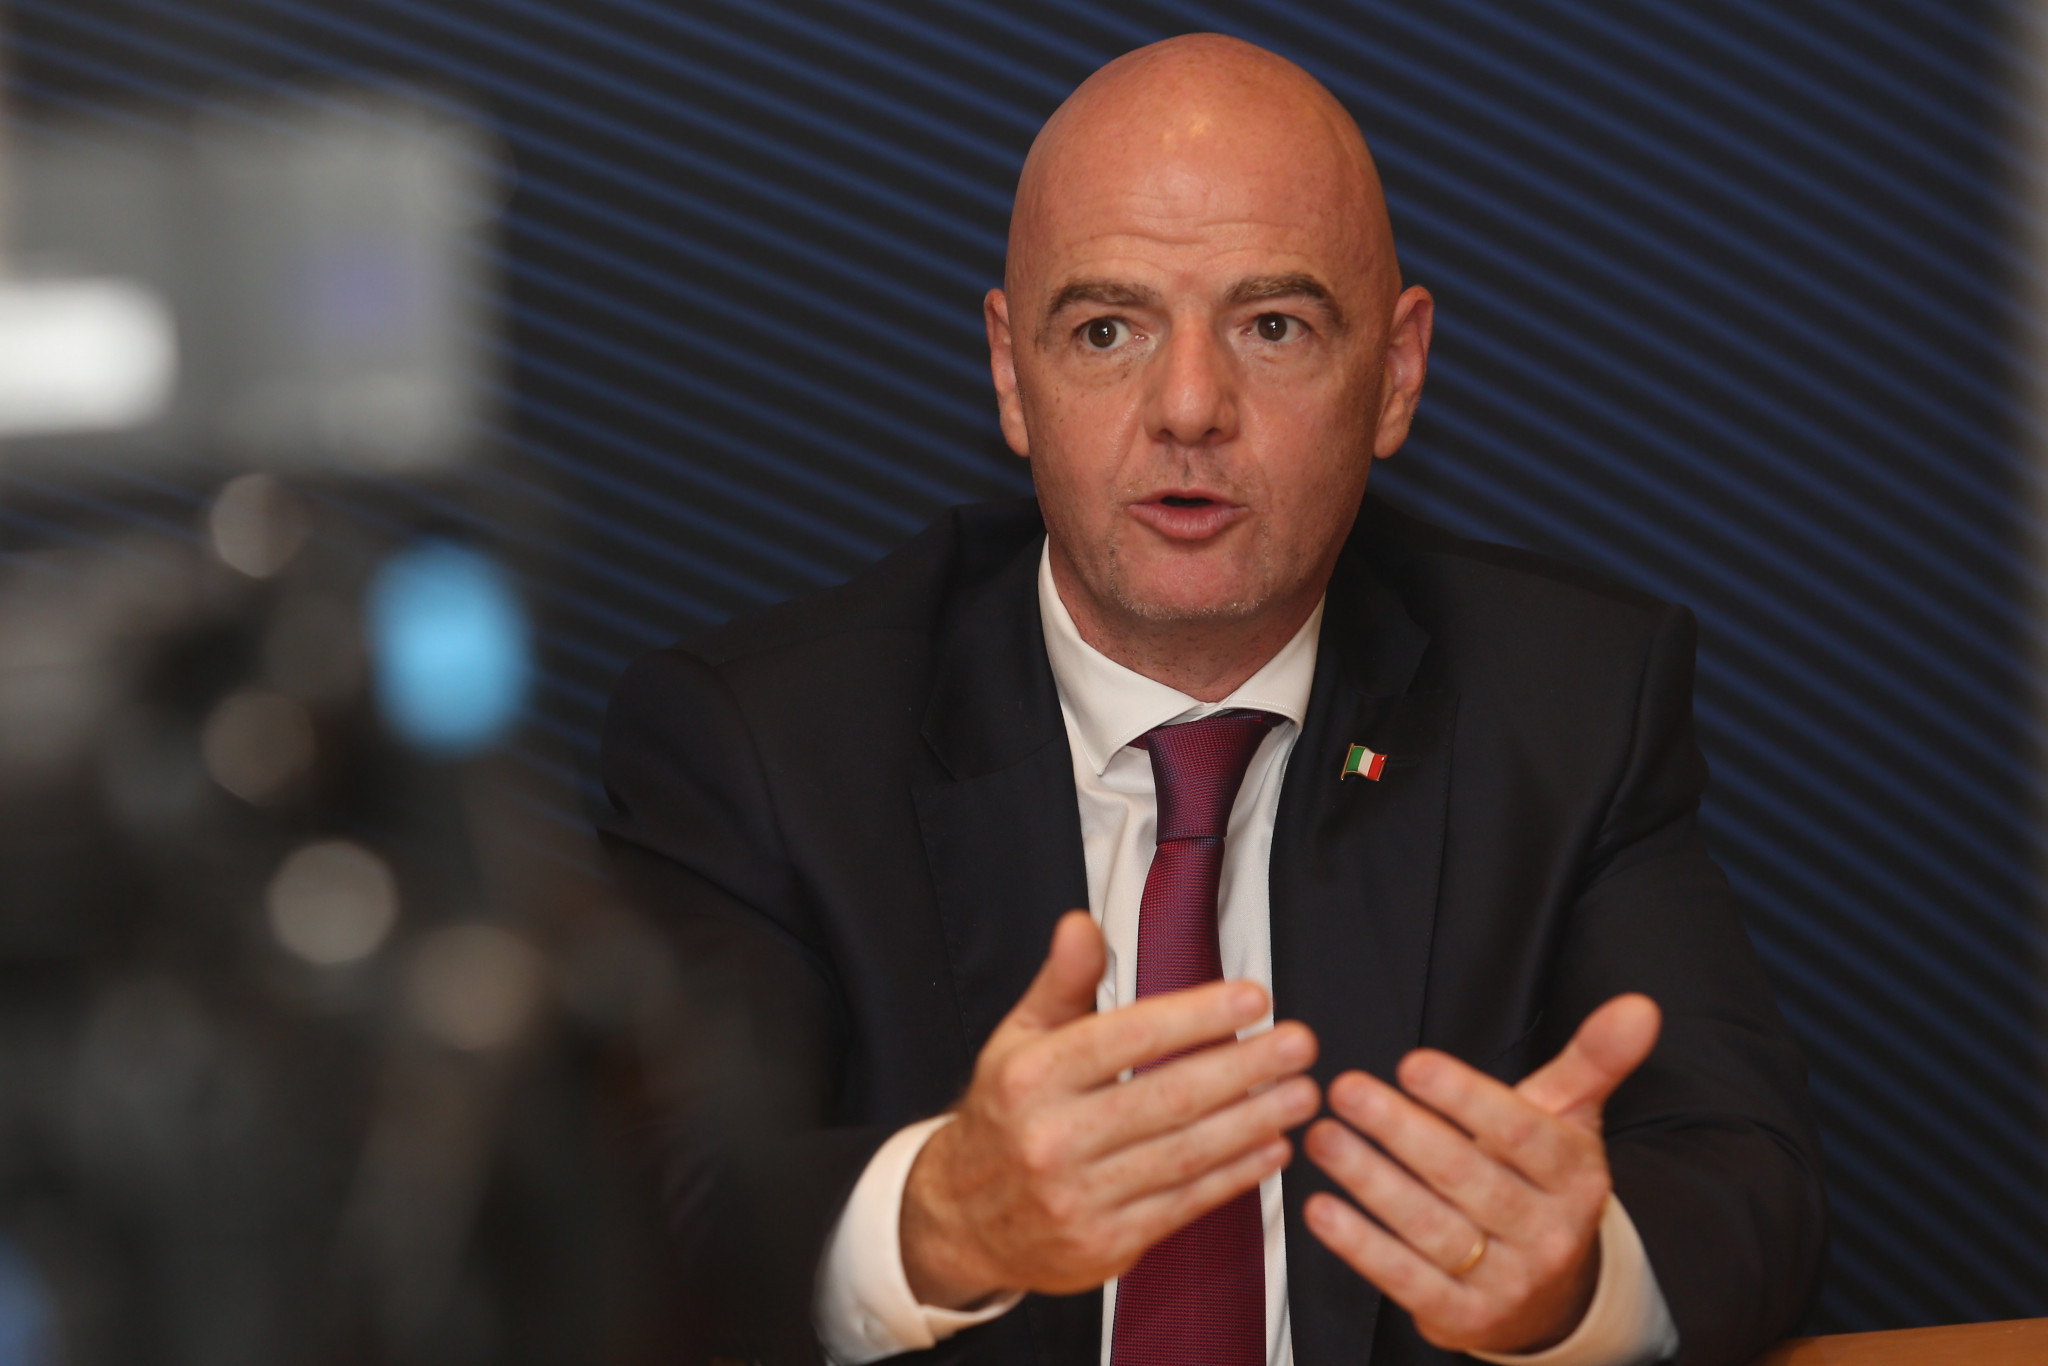 Amnesty International criticise Infantino for appearance in promotional video of Saudi Arabia